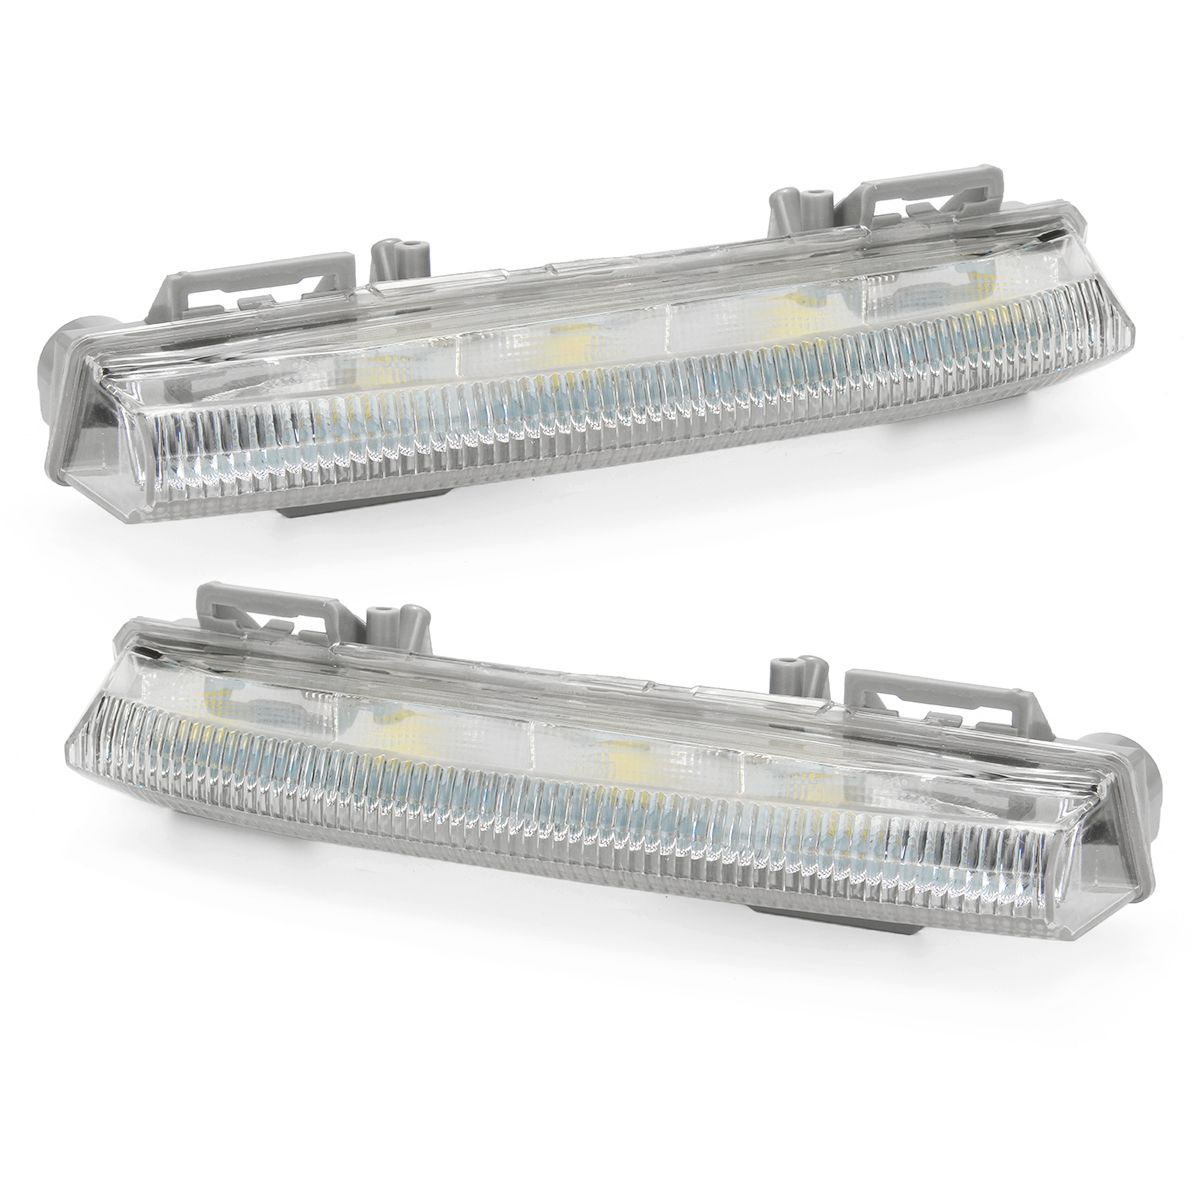 Car-LED-Front-DRL-Fog-Lights-LeftRight-for-Mercedes-Benz-W204-W212-C250-C280-C350-E350-A2049068900-A-1460320